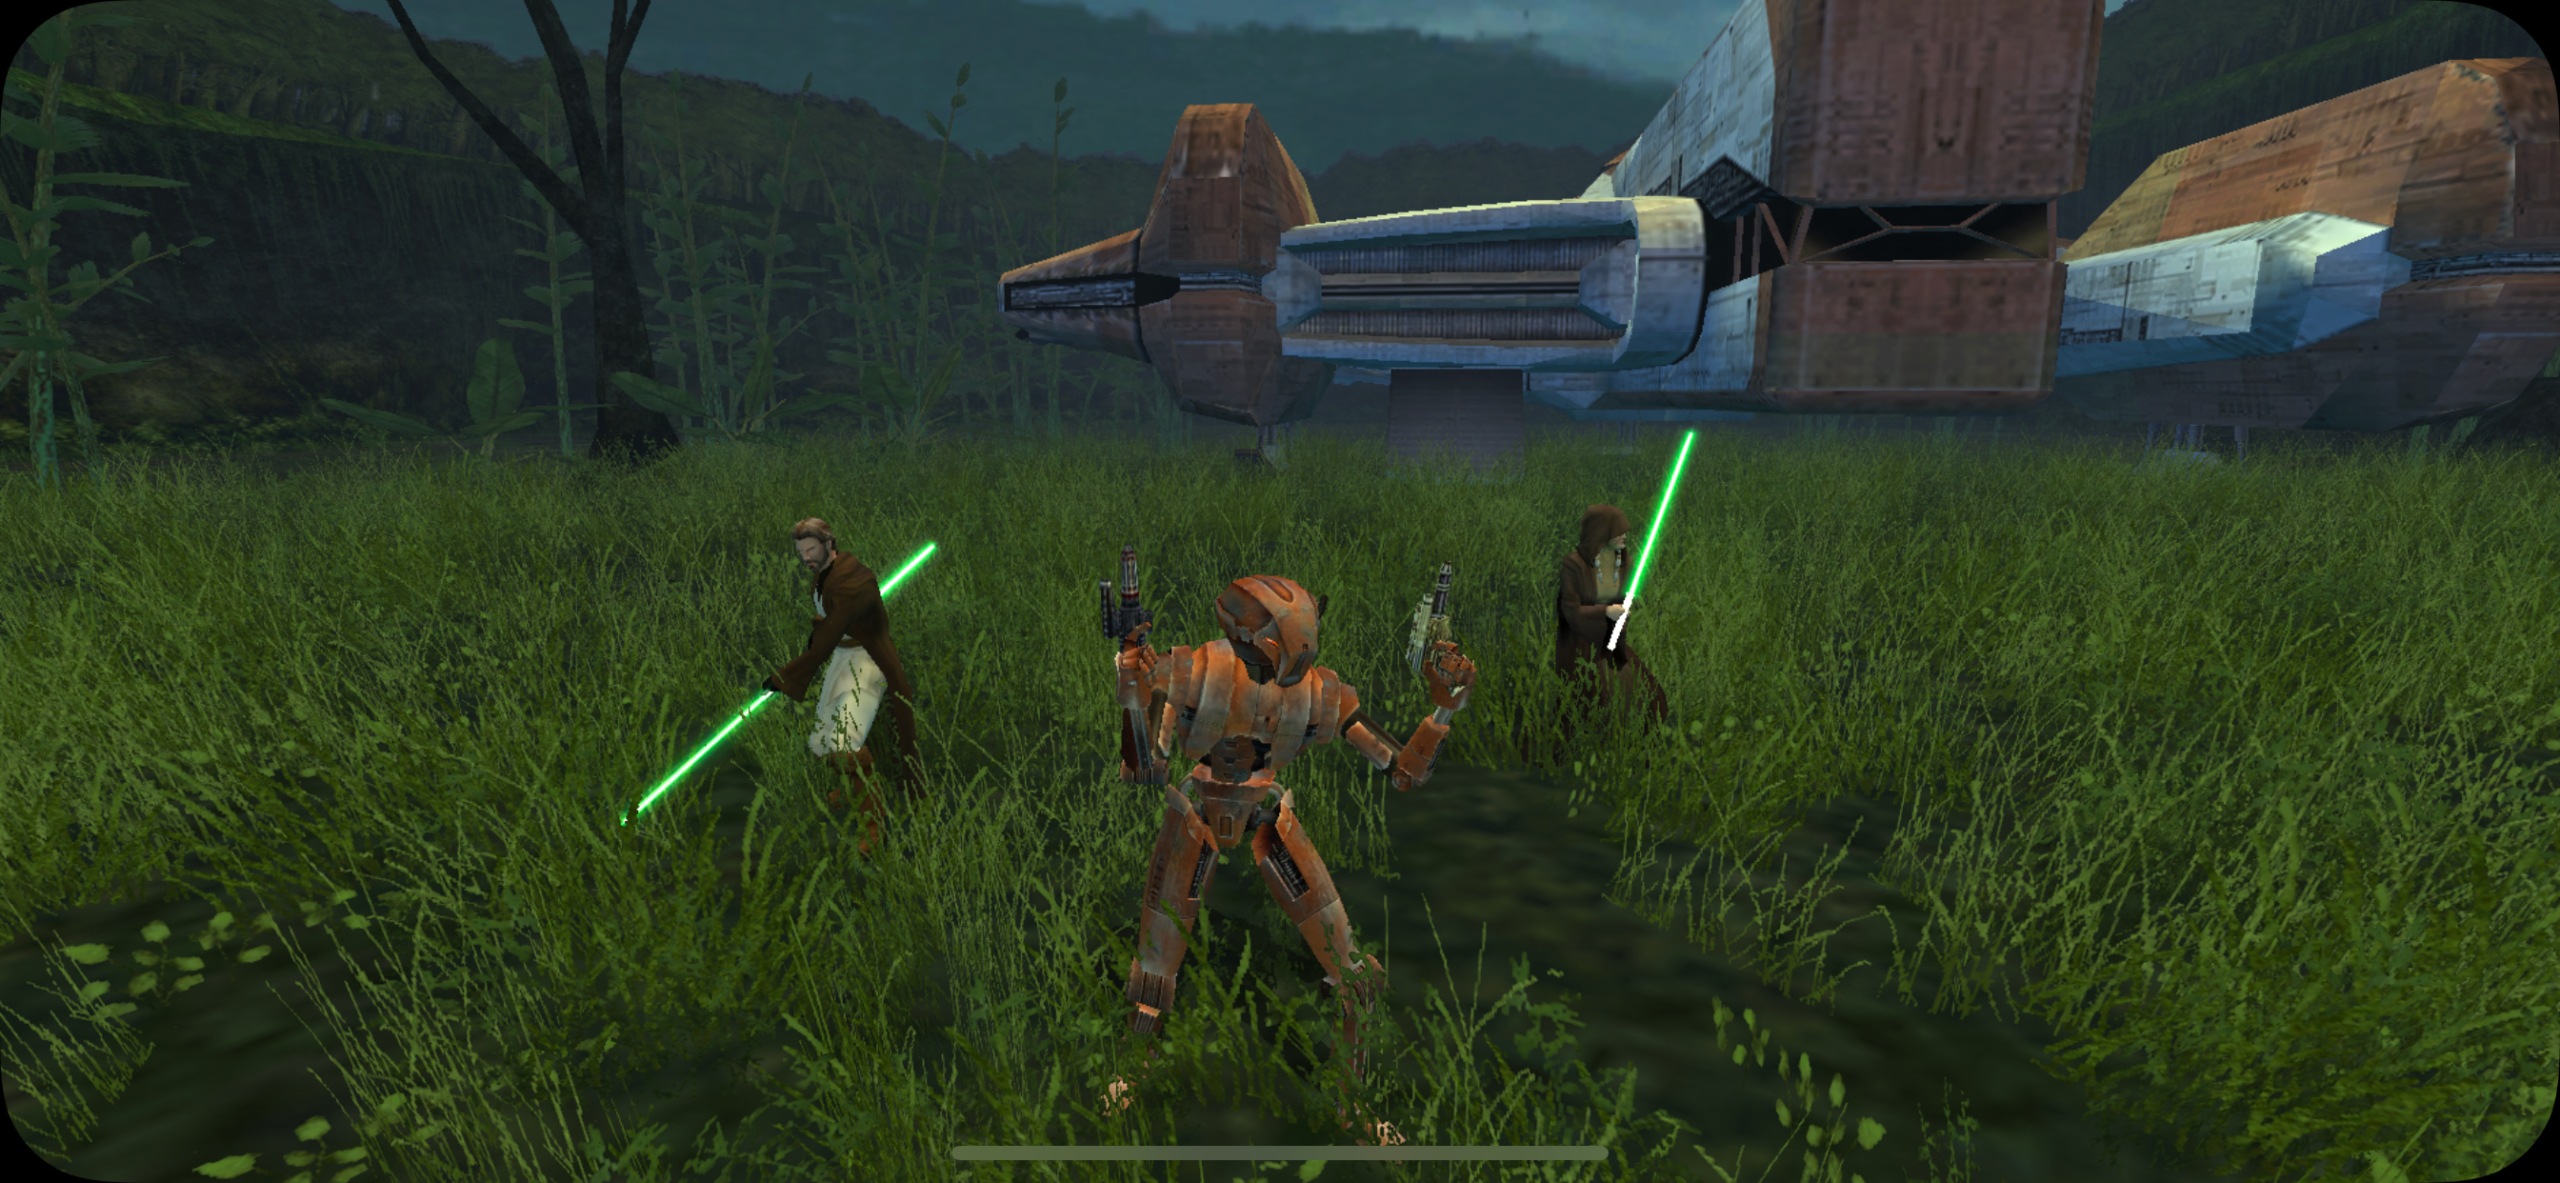 Star Wars Knights Of Old Republic Android HD Gameplay